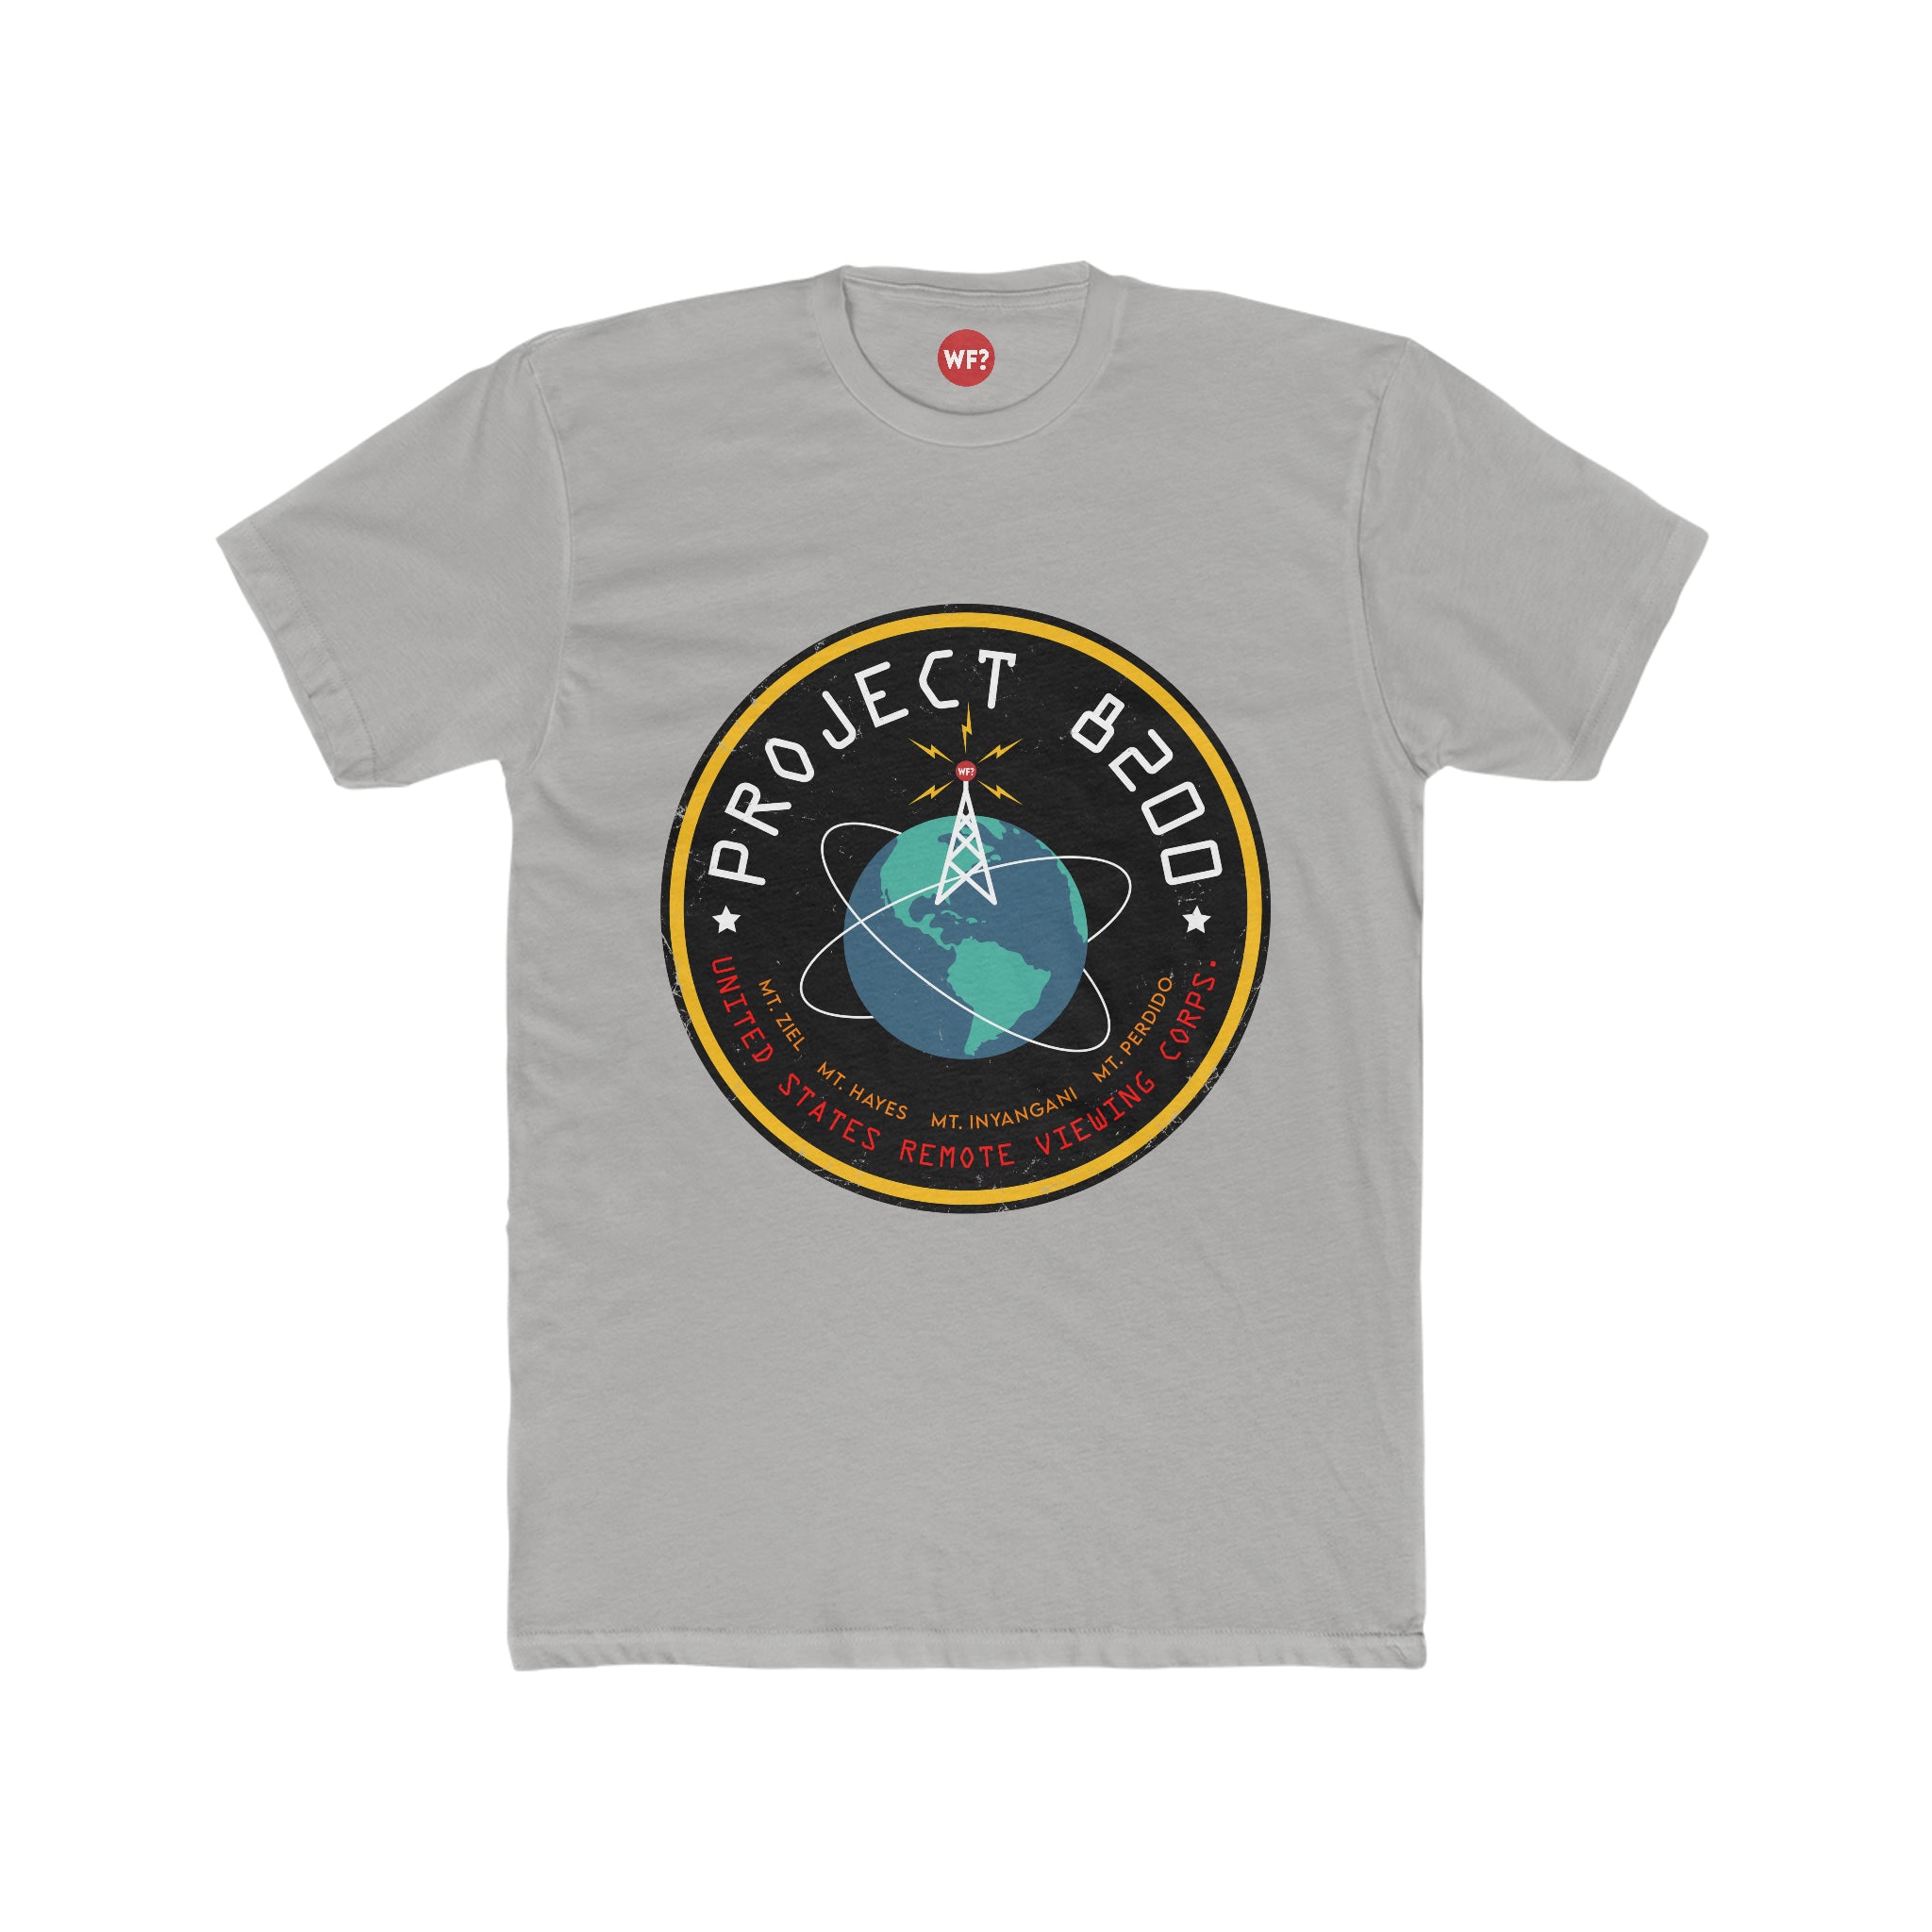 Buy solid-light-grey Project 8200 Limited T-Shirt